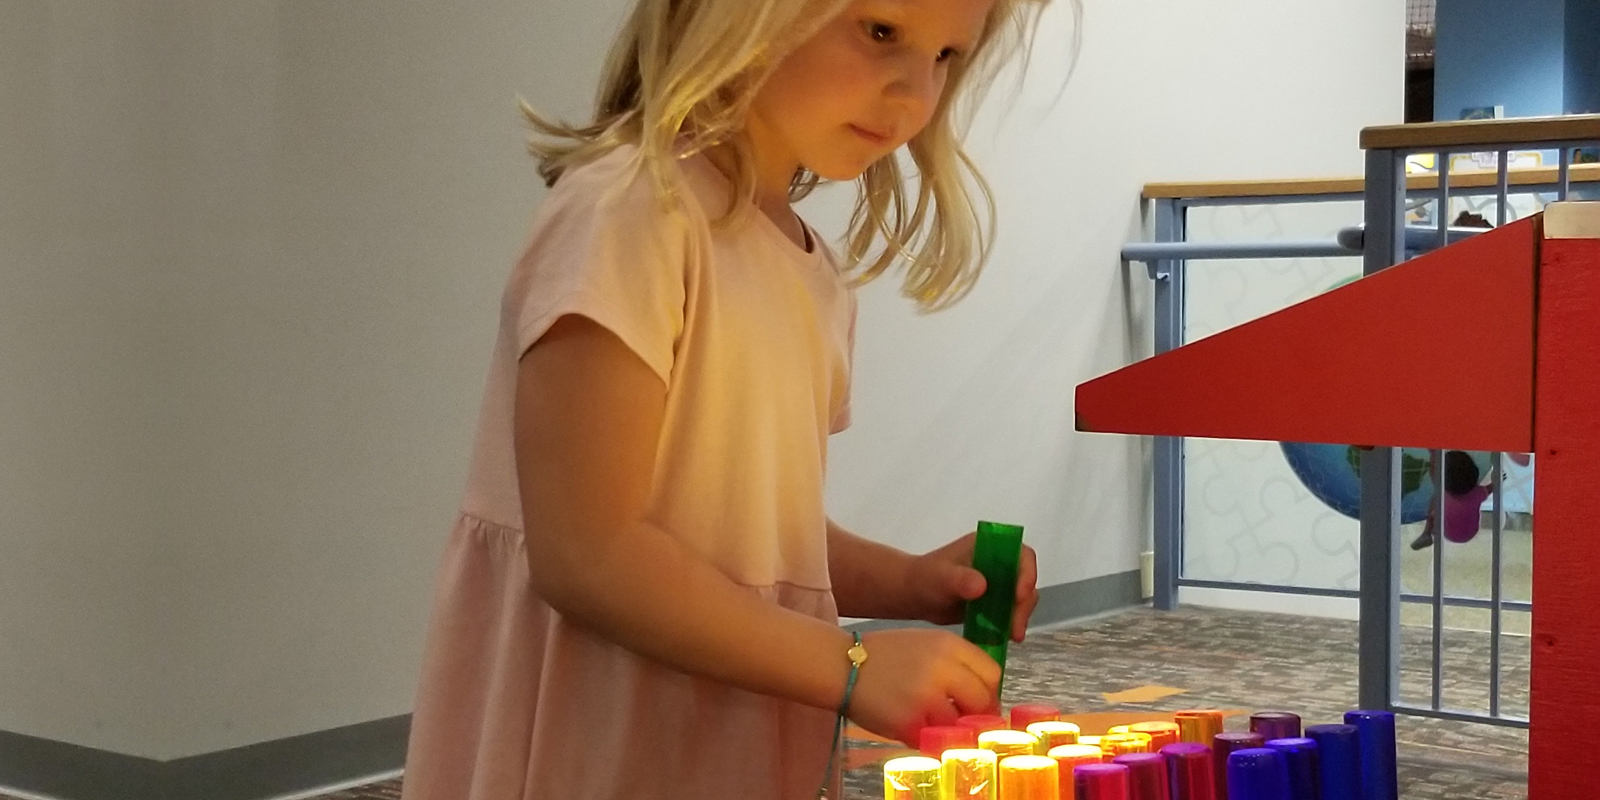 Young girl with blonde hair and pink dress playing with an oversized light bright toy with colorful pegs